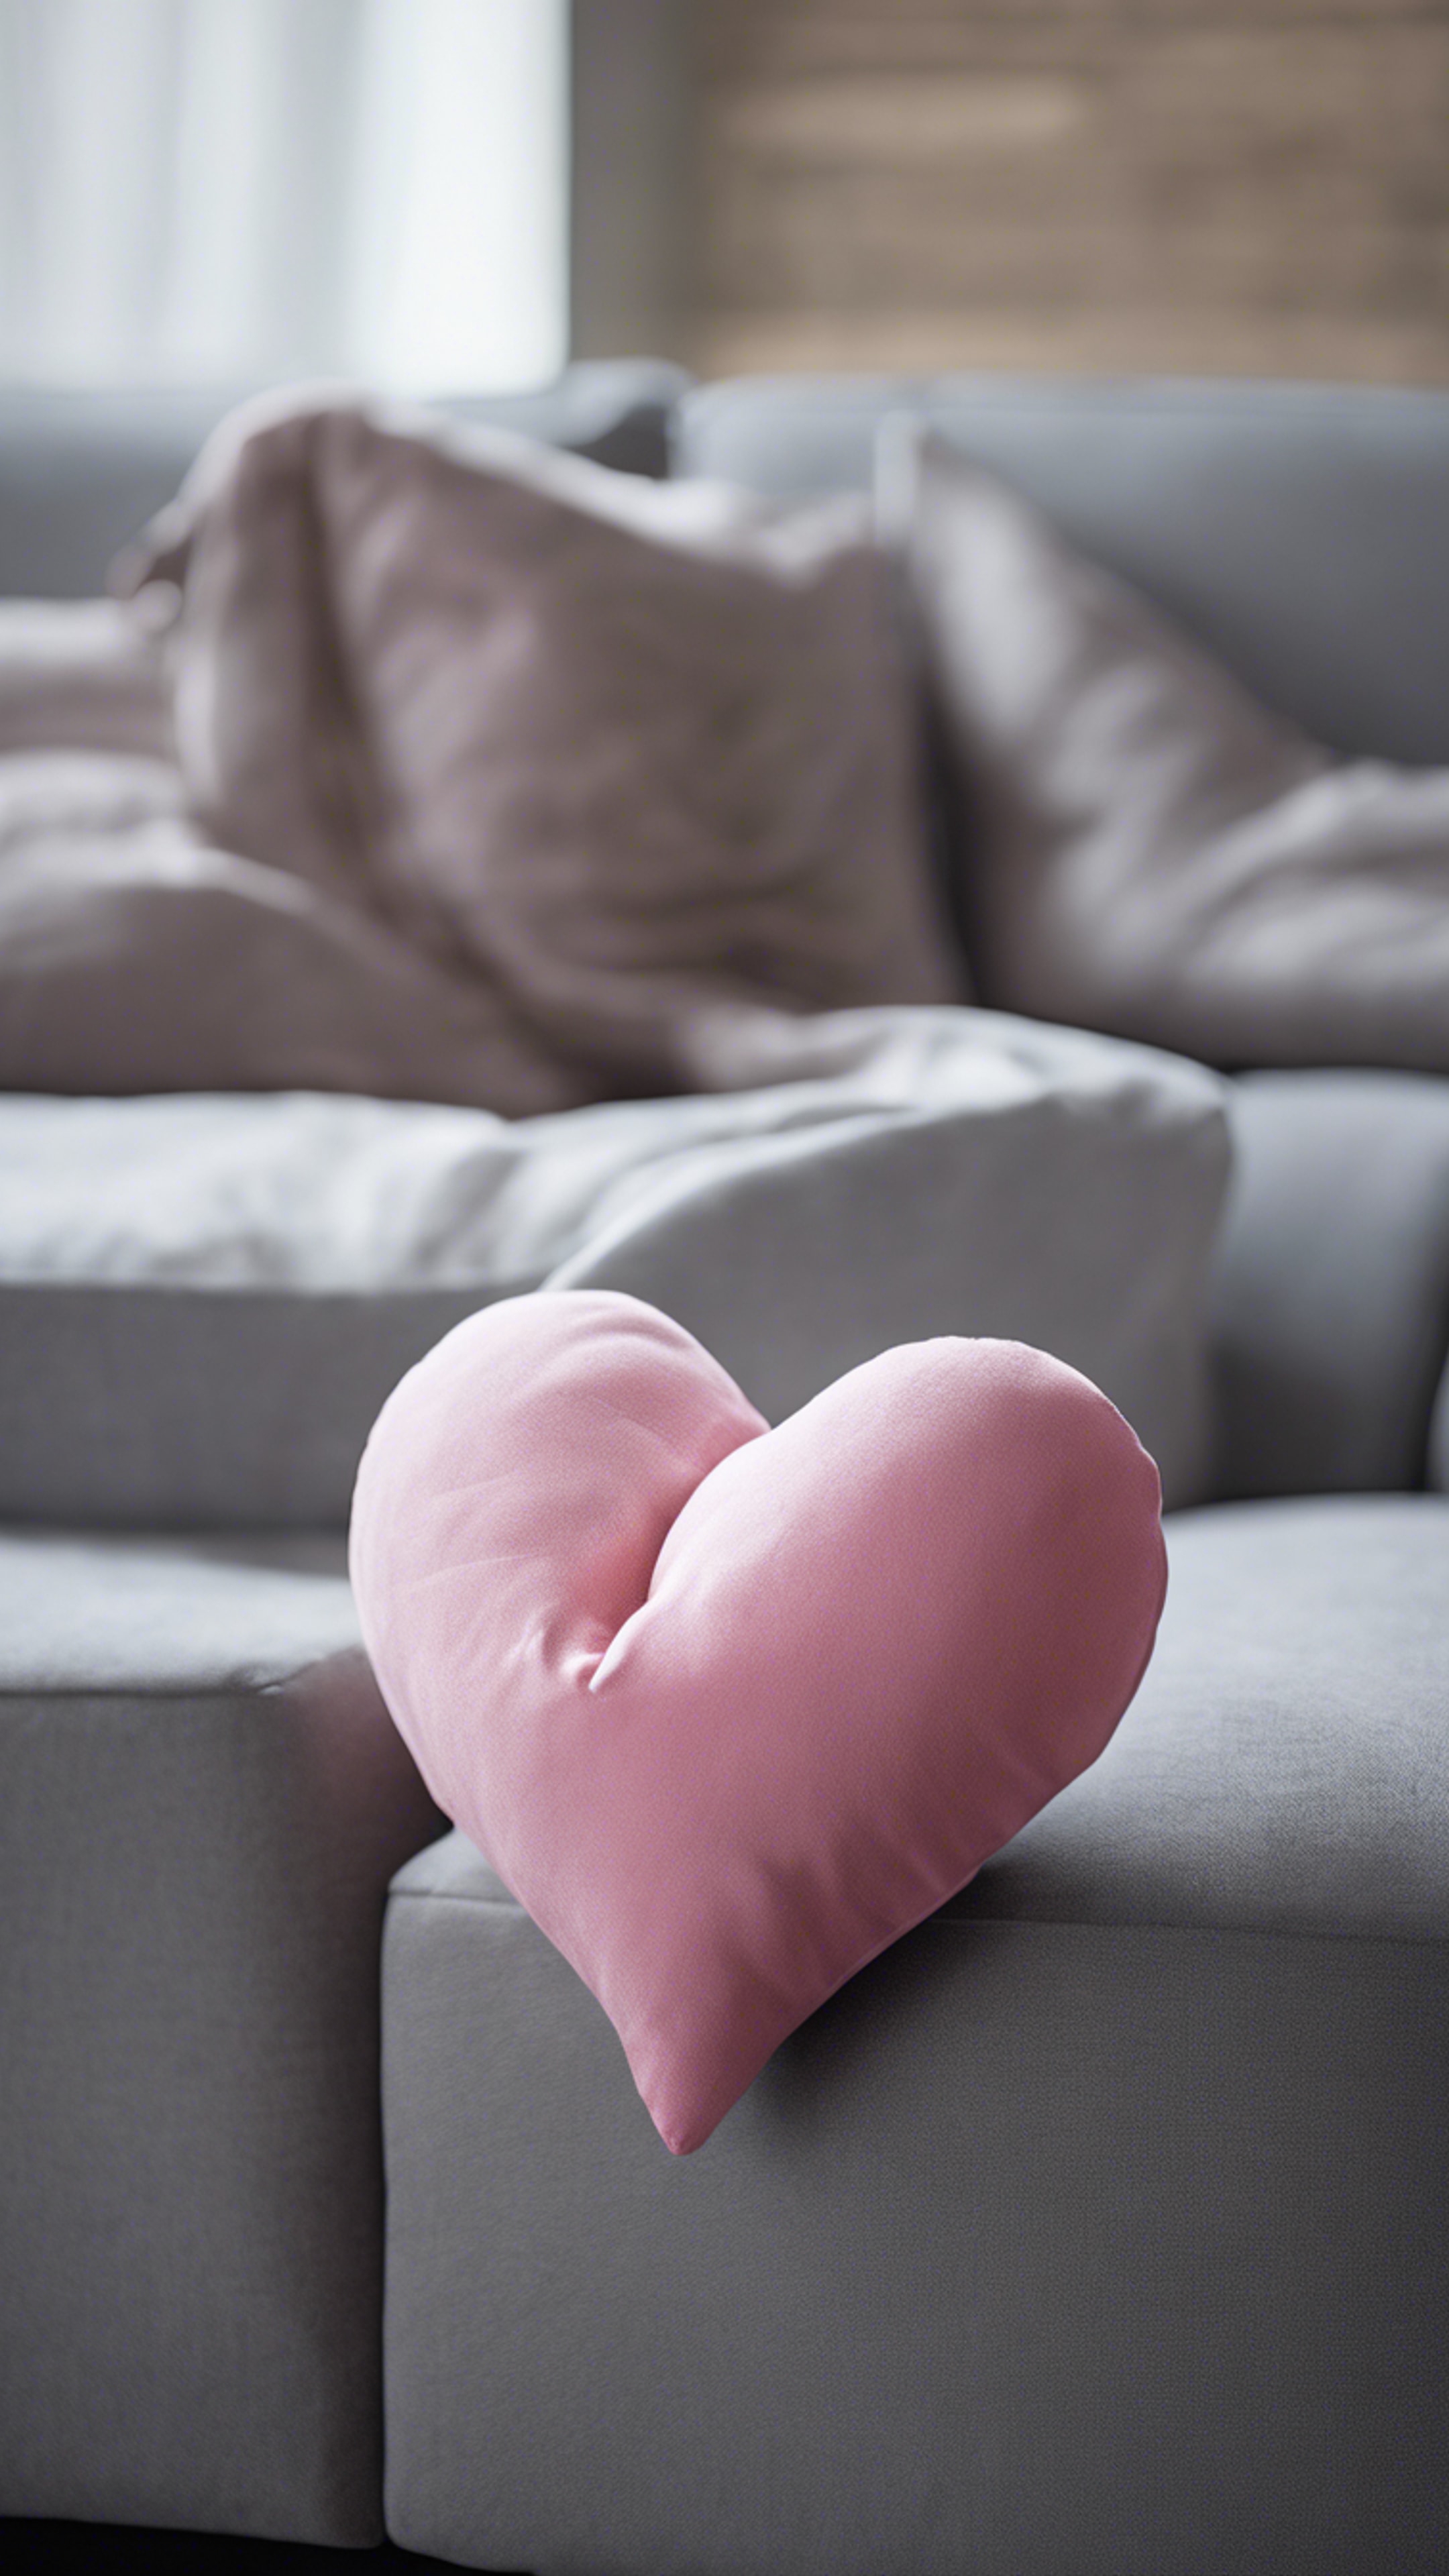 A pink heart-shaped pillow casually thrown on a grey sofa. Wallpaper[1f5628bd375f4743af26]